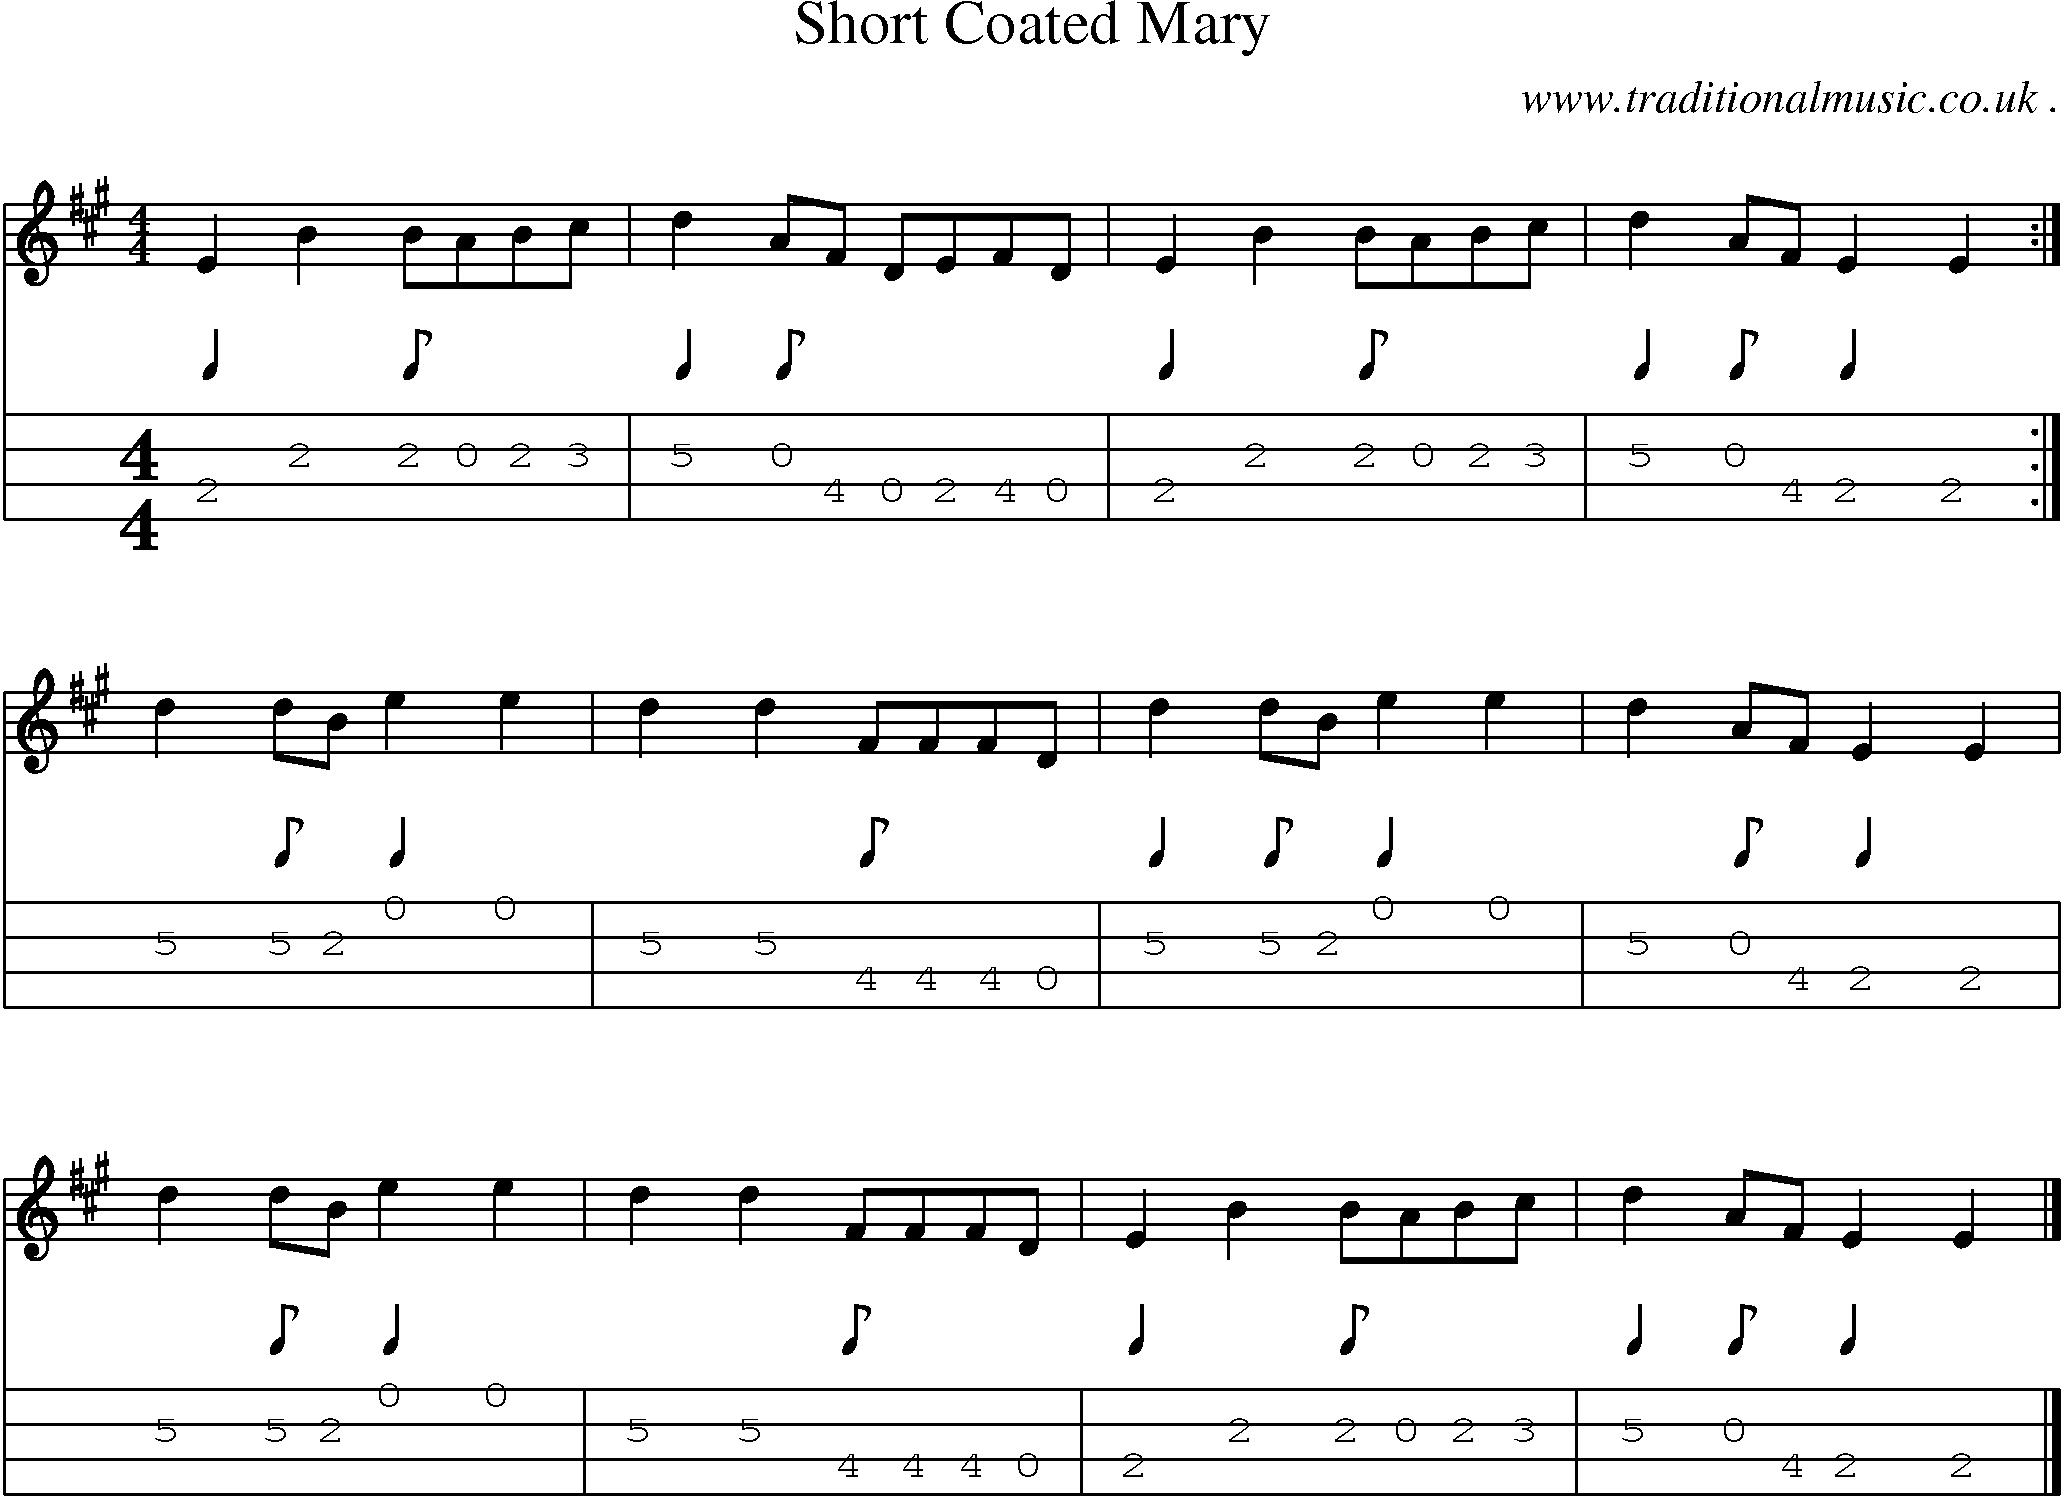 Sheet-music  score, Chords and Mandolin Tabs for Short Coated Mary